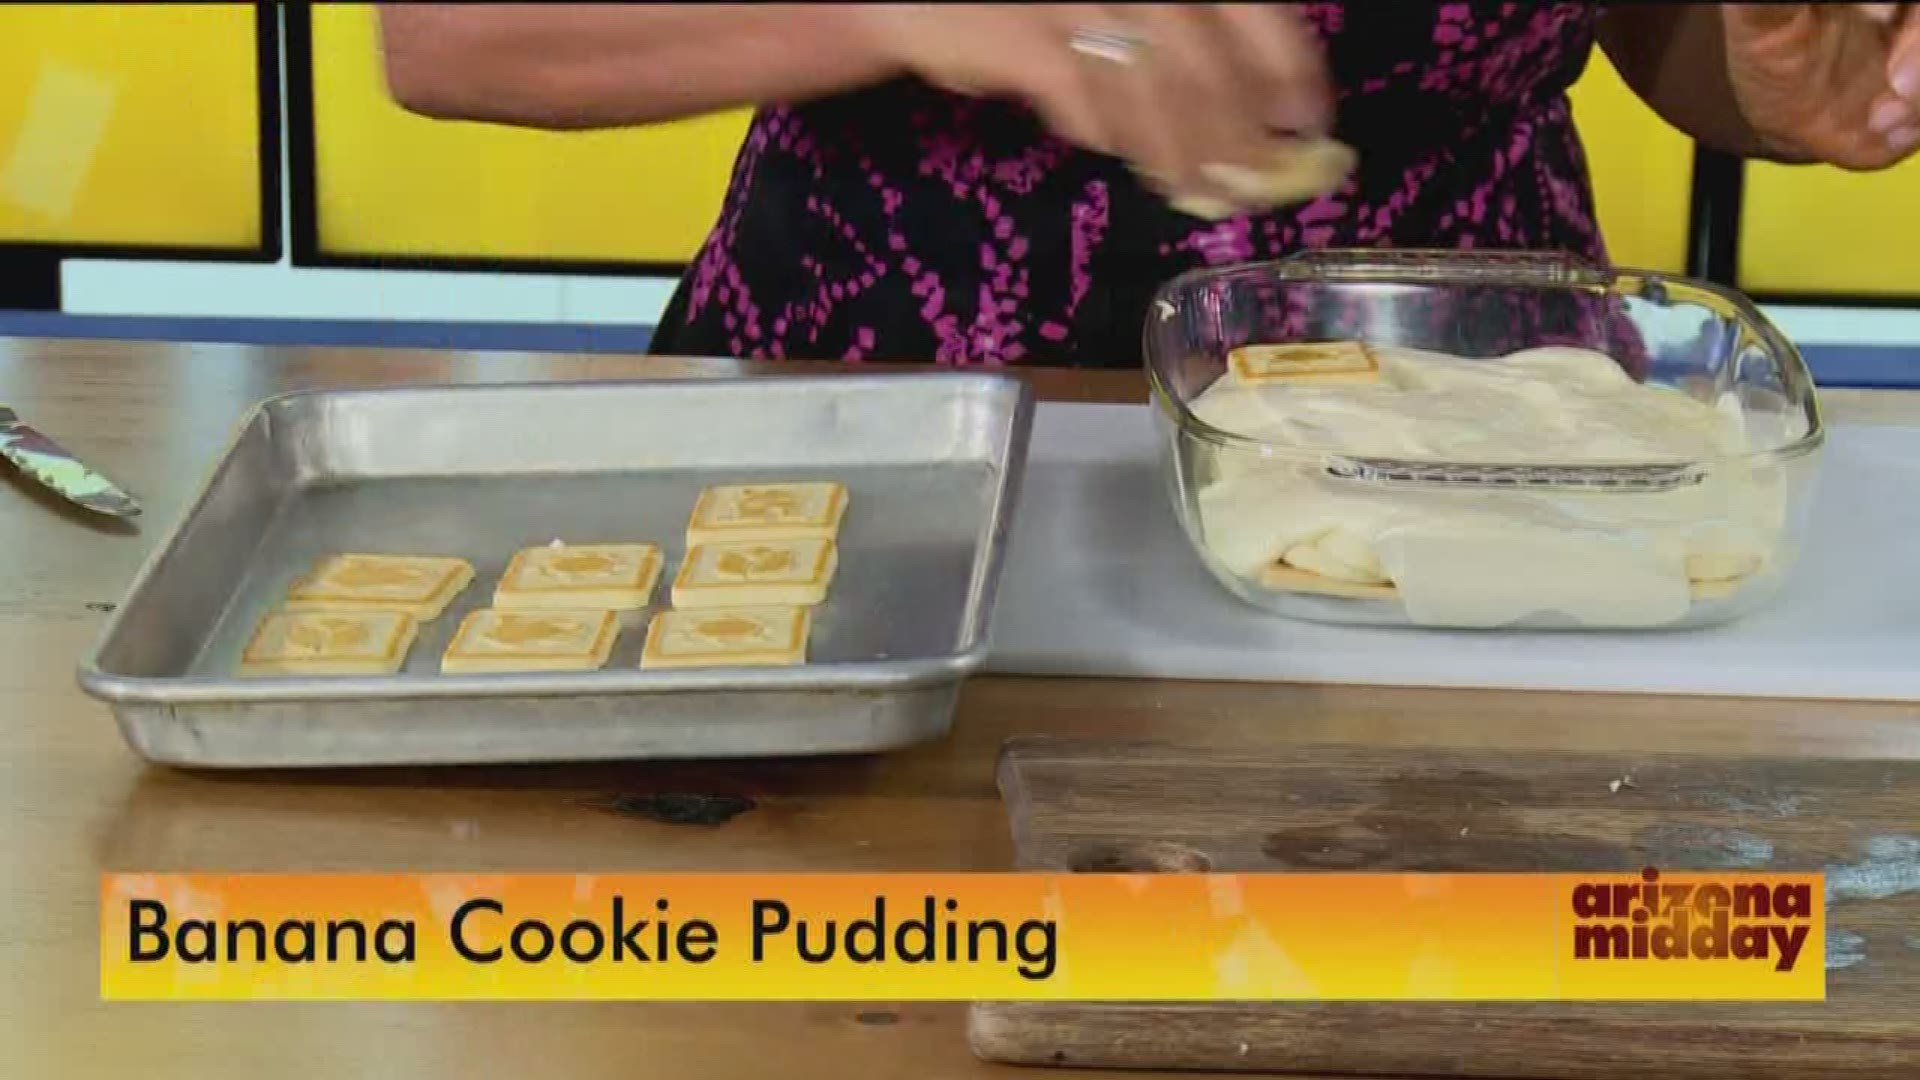 Jan is in the kitchen showing us how to make a sweet dessert that can be dairy free and still tasty.